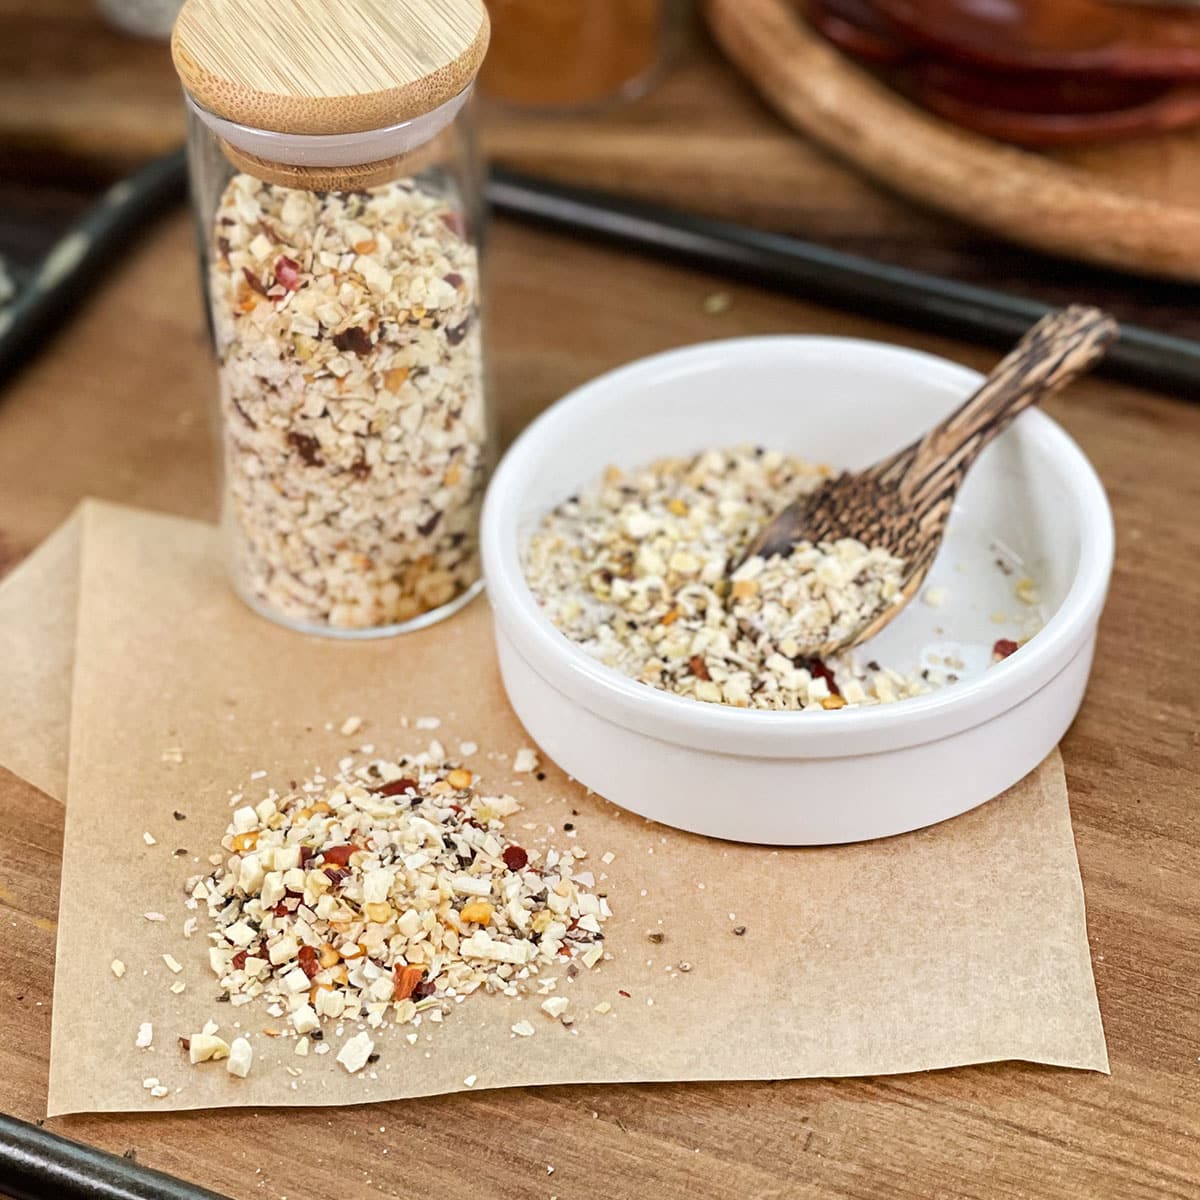 Coarse steakhouse seasoning in glass jar, in dish with spoon, and spilled on parchment paper.